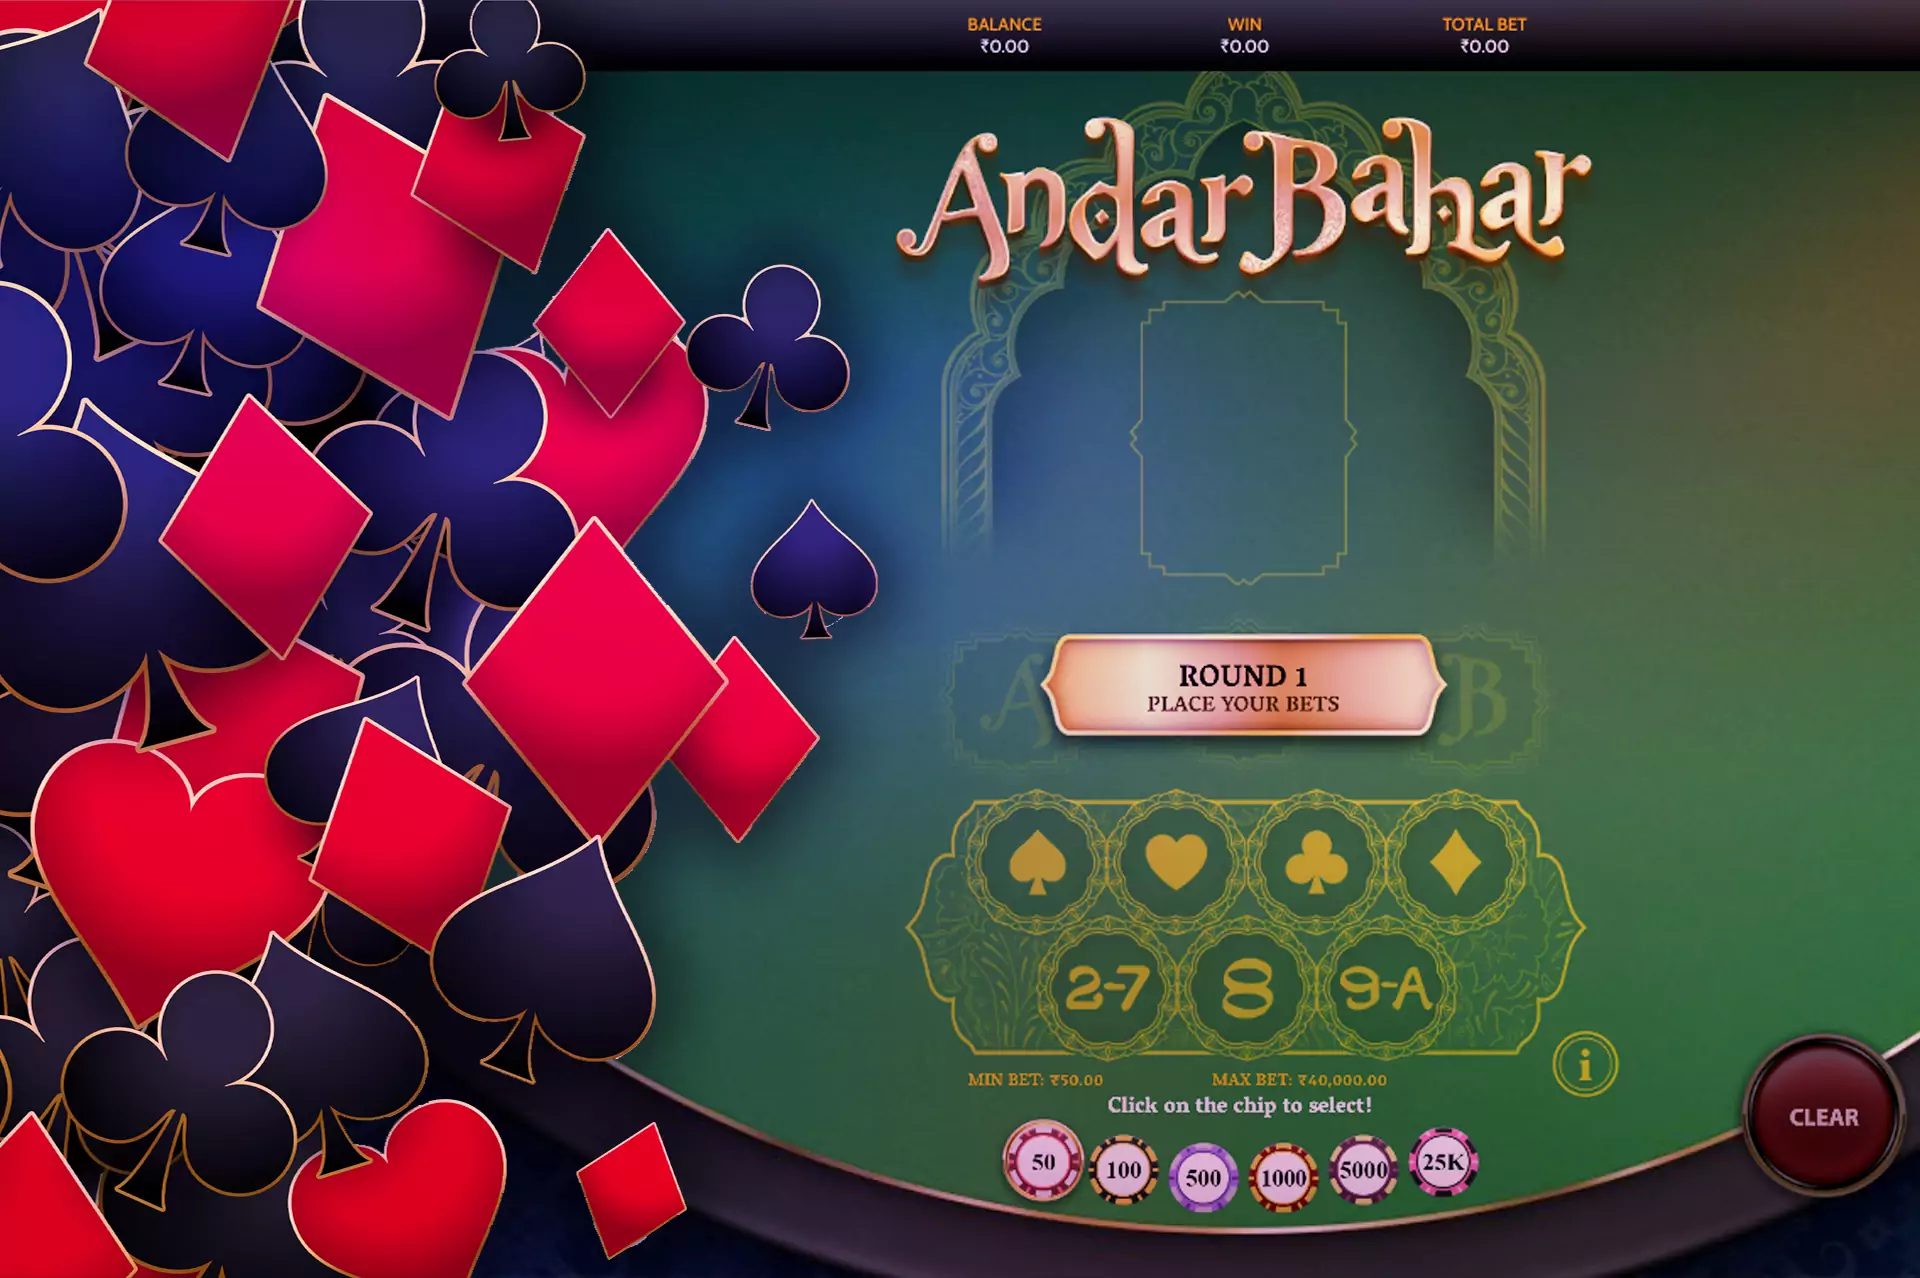 Andar Bahar is a classic game of chance where you need to choose the side you want to place a bet on.